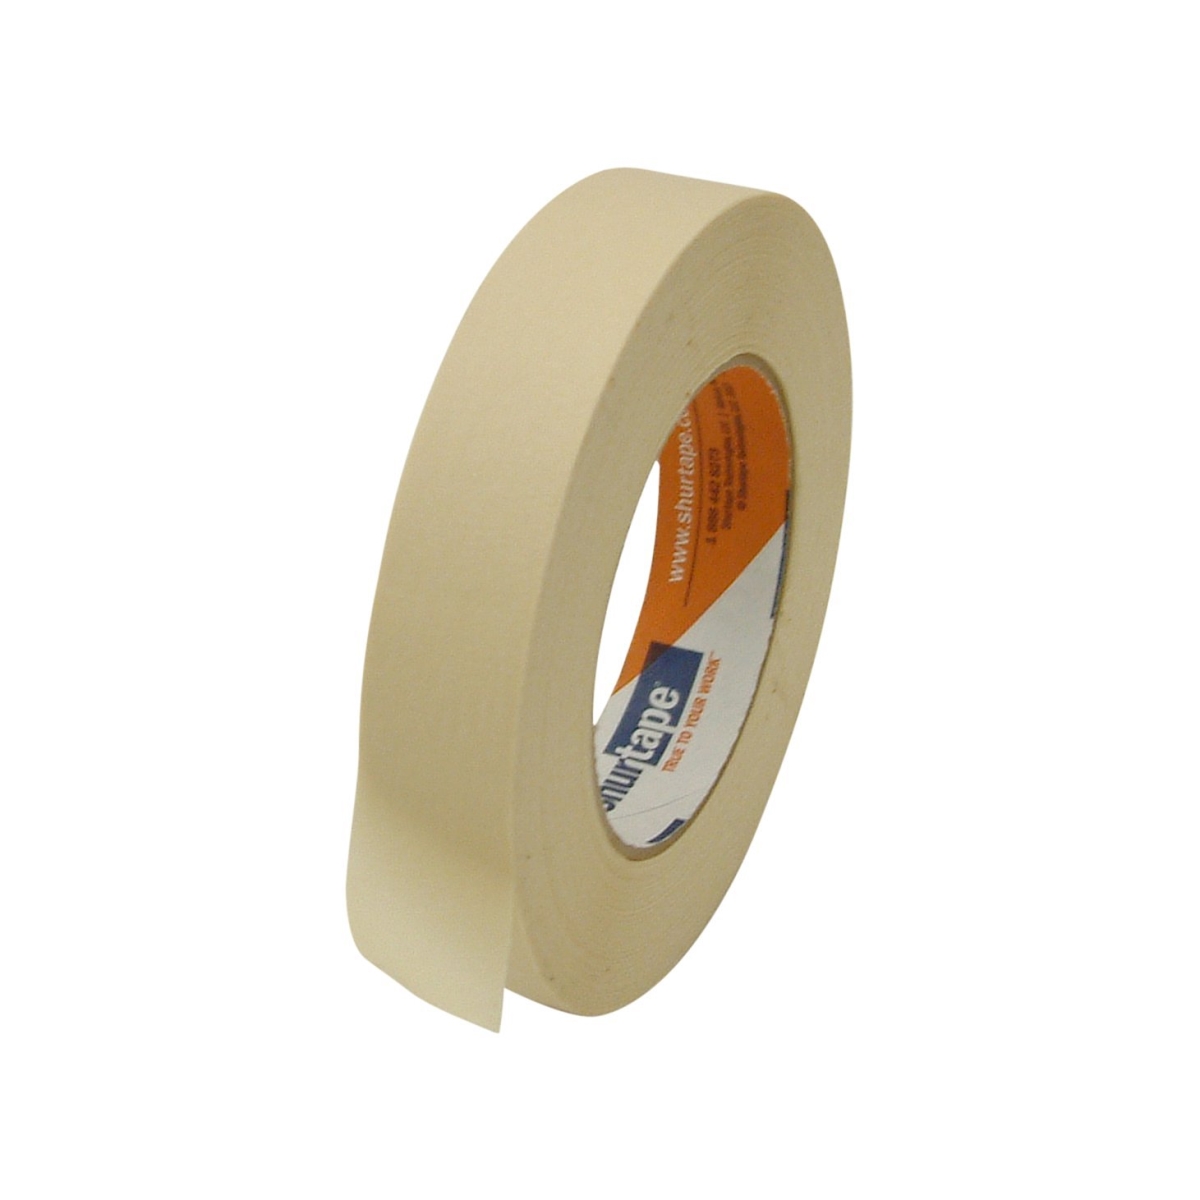 689-e2b 1.5 In. X 60 Yards Mask Tape, Natural